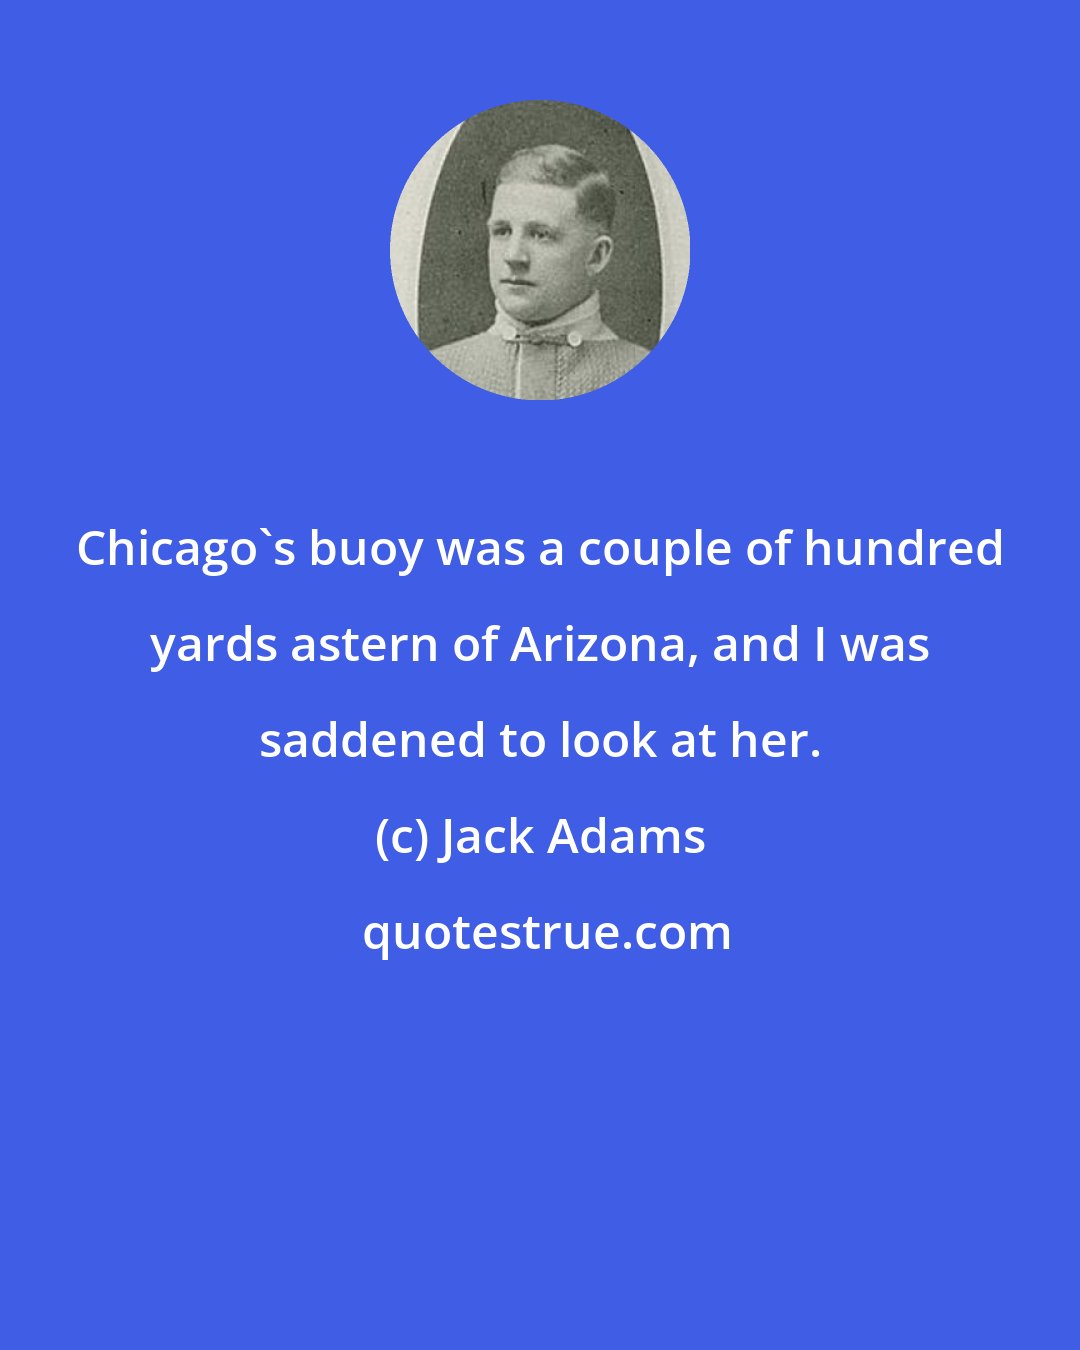 Jack Adams: Chicago's buoy was a couple of hundred yards astern of Arizona, and I was saddened to look at her.